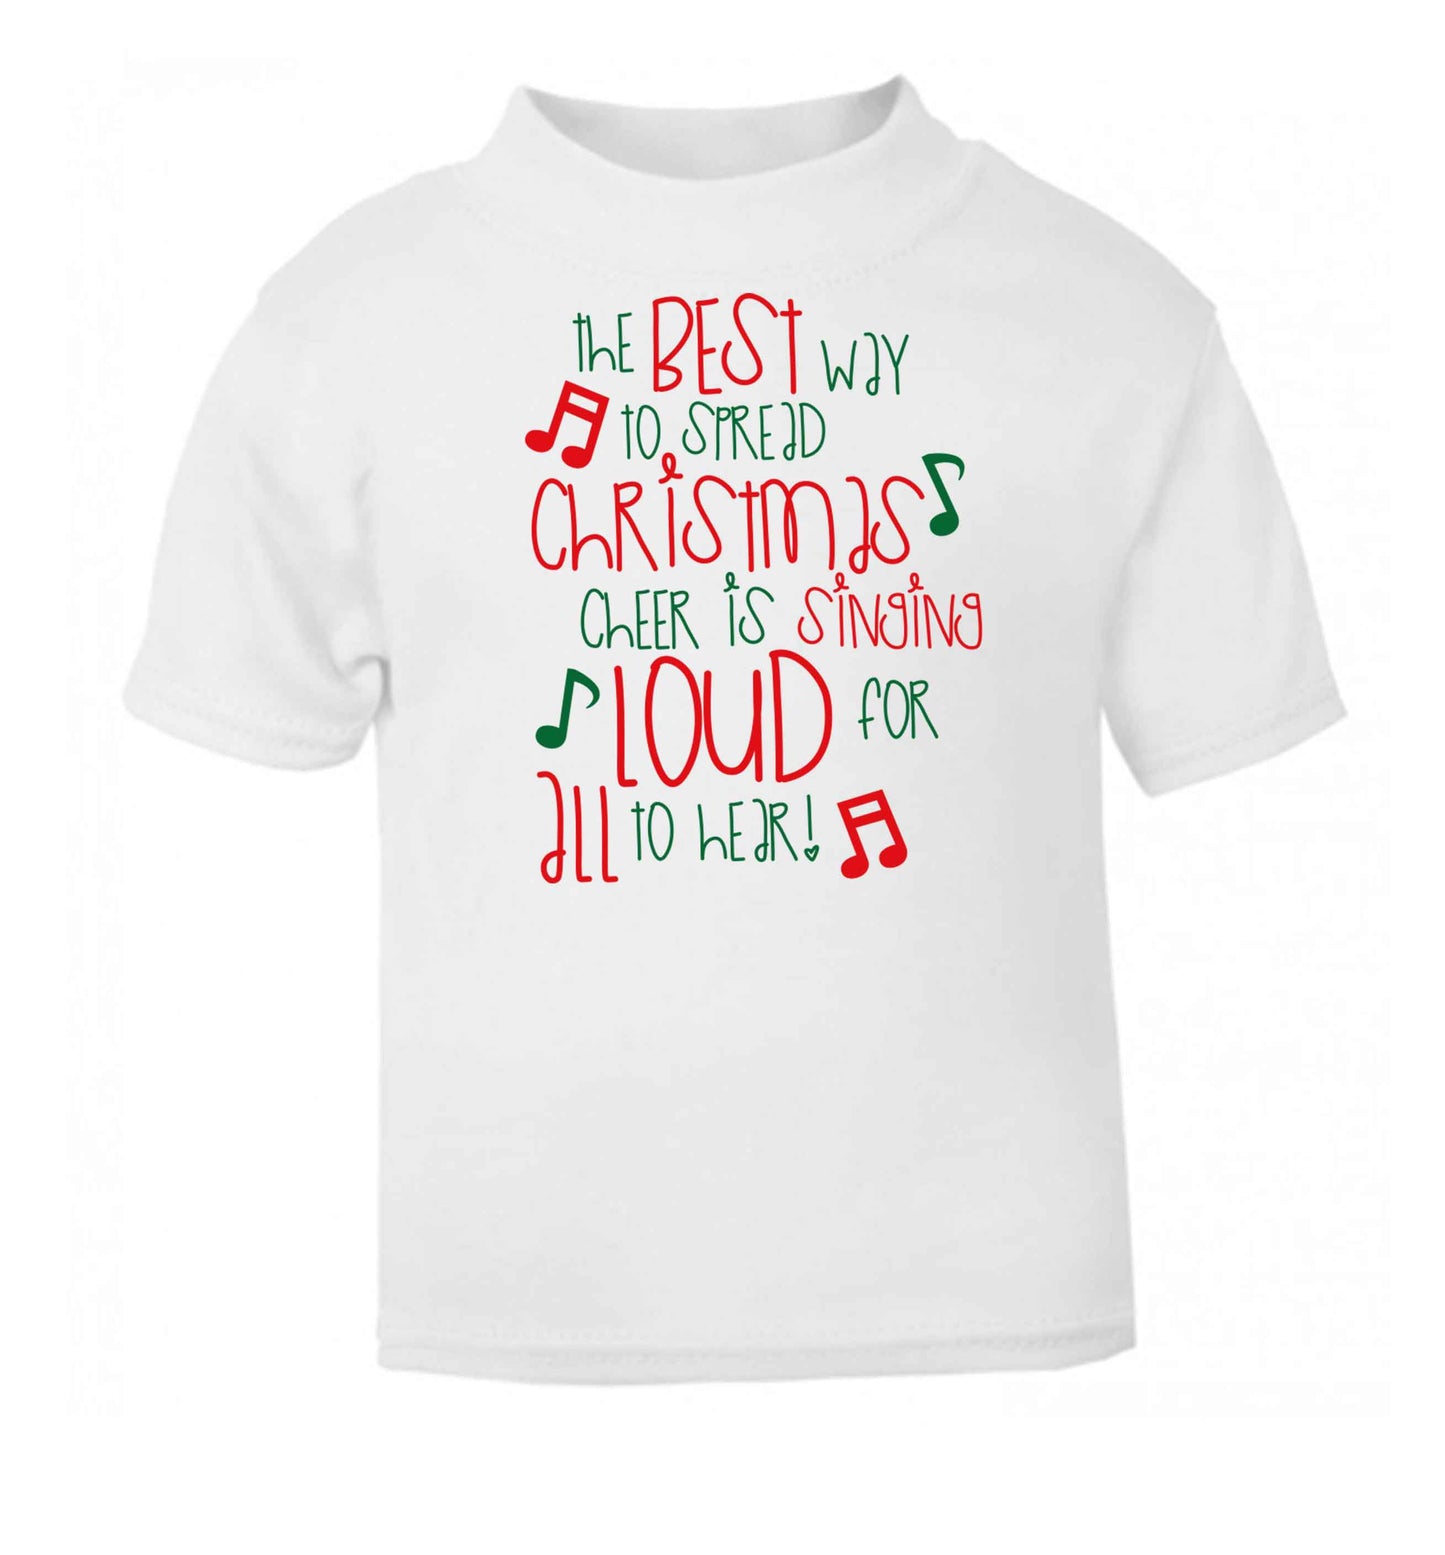 The best way to spread Christmas cheer is singing loud for all to hear white baby toddler Tshirt 2 Years